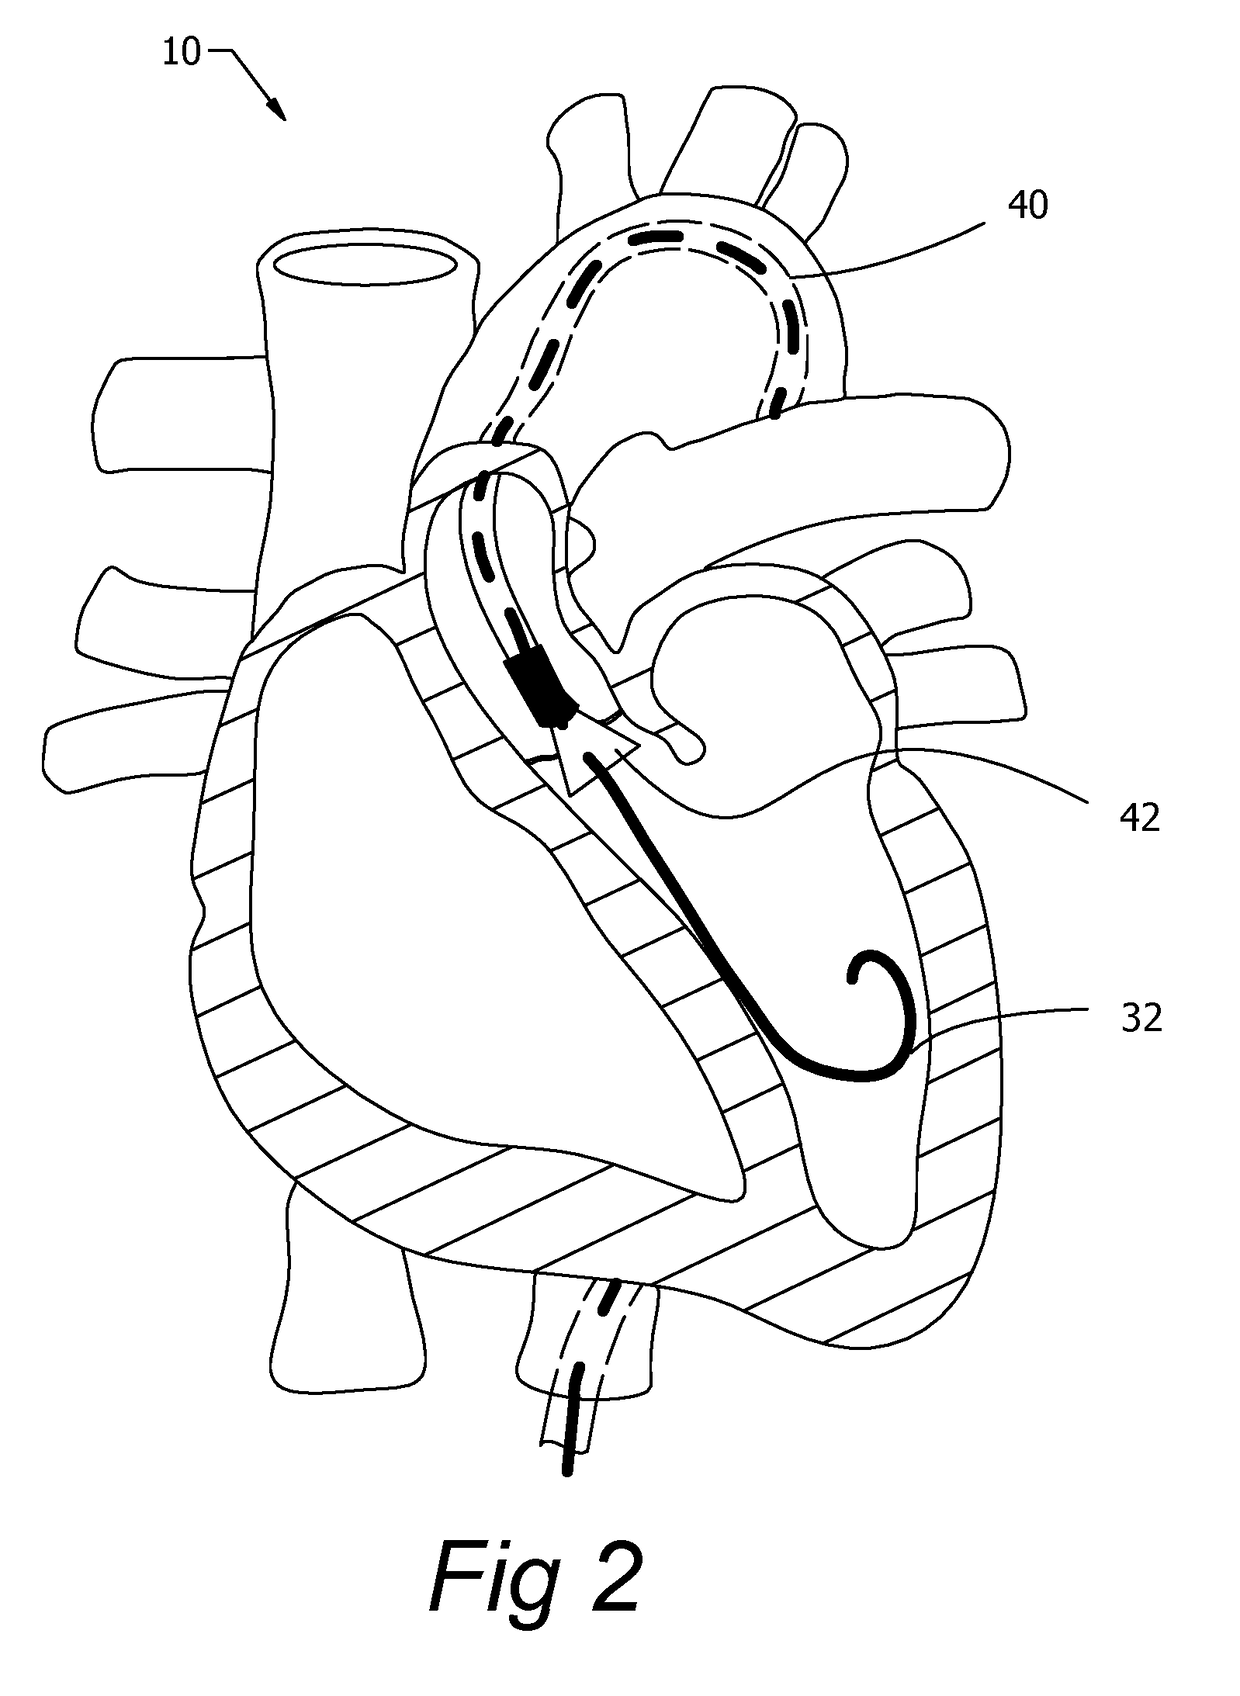 Integrated catheter guide wire control device